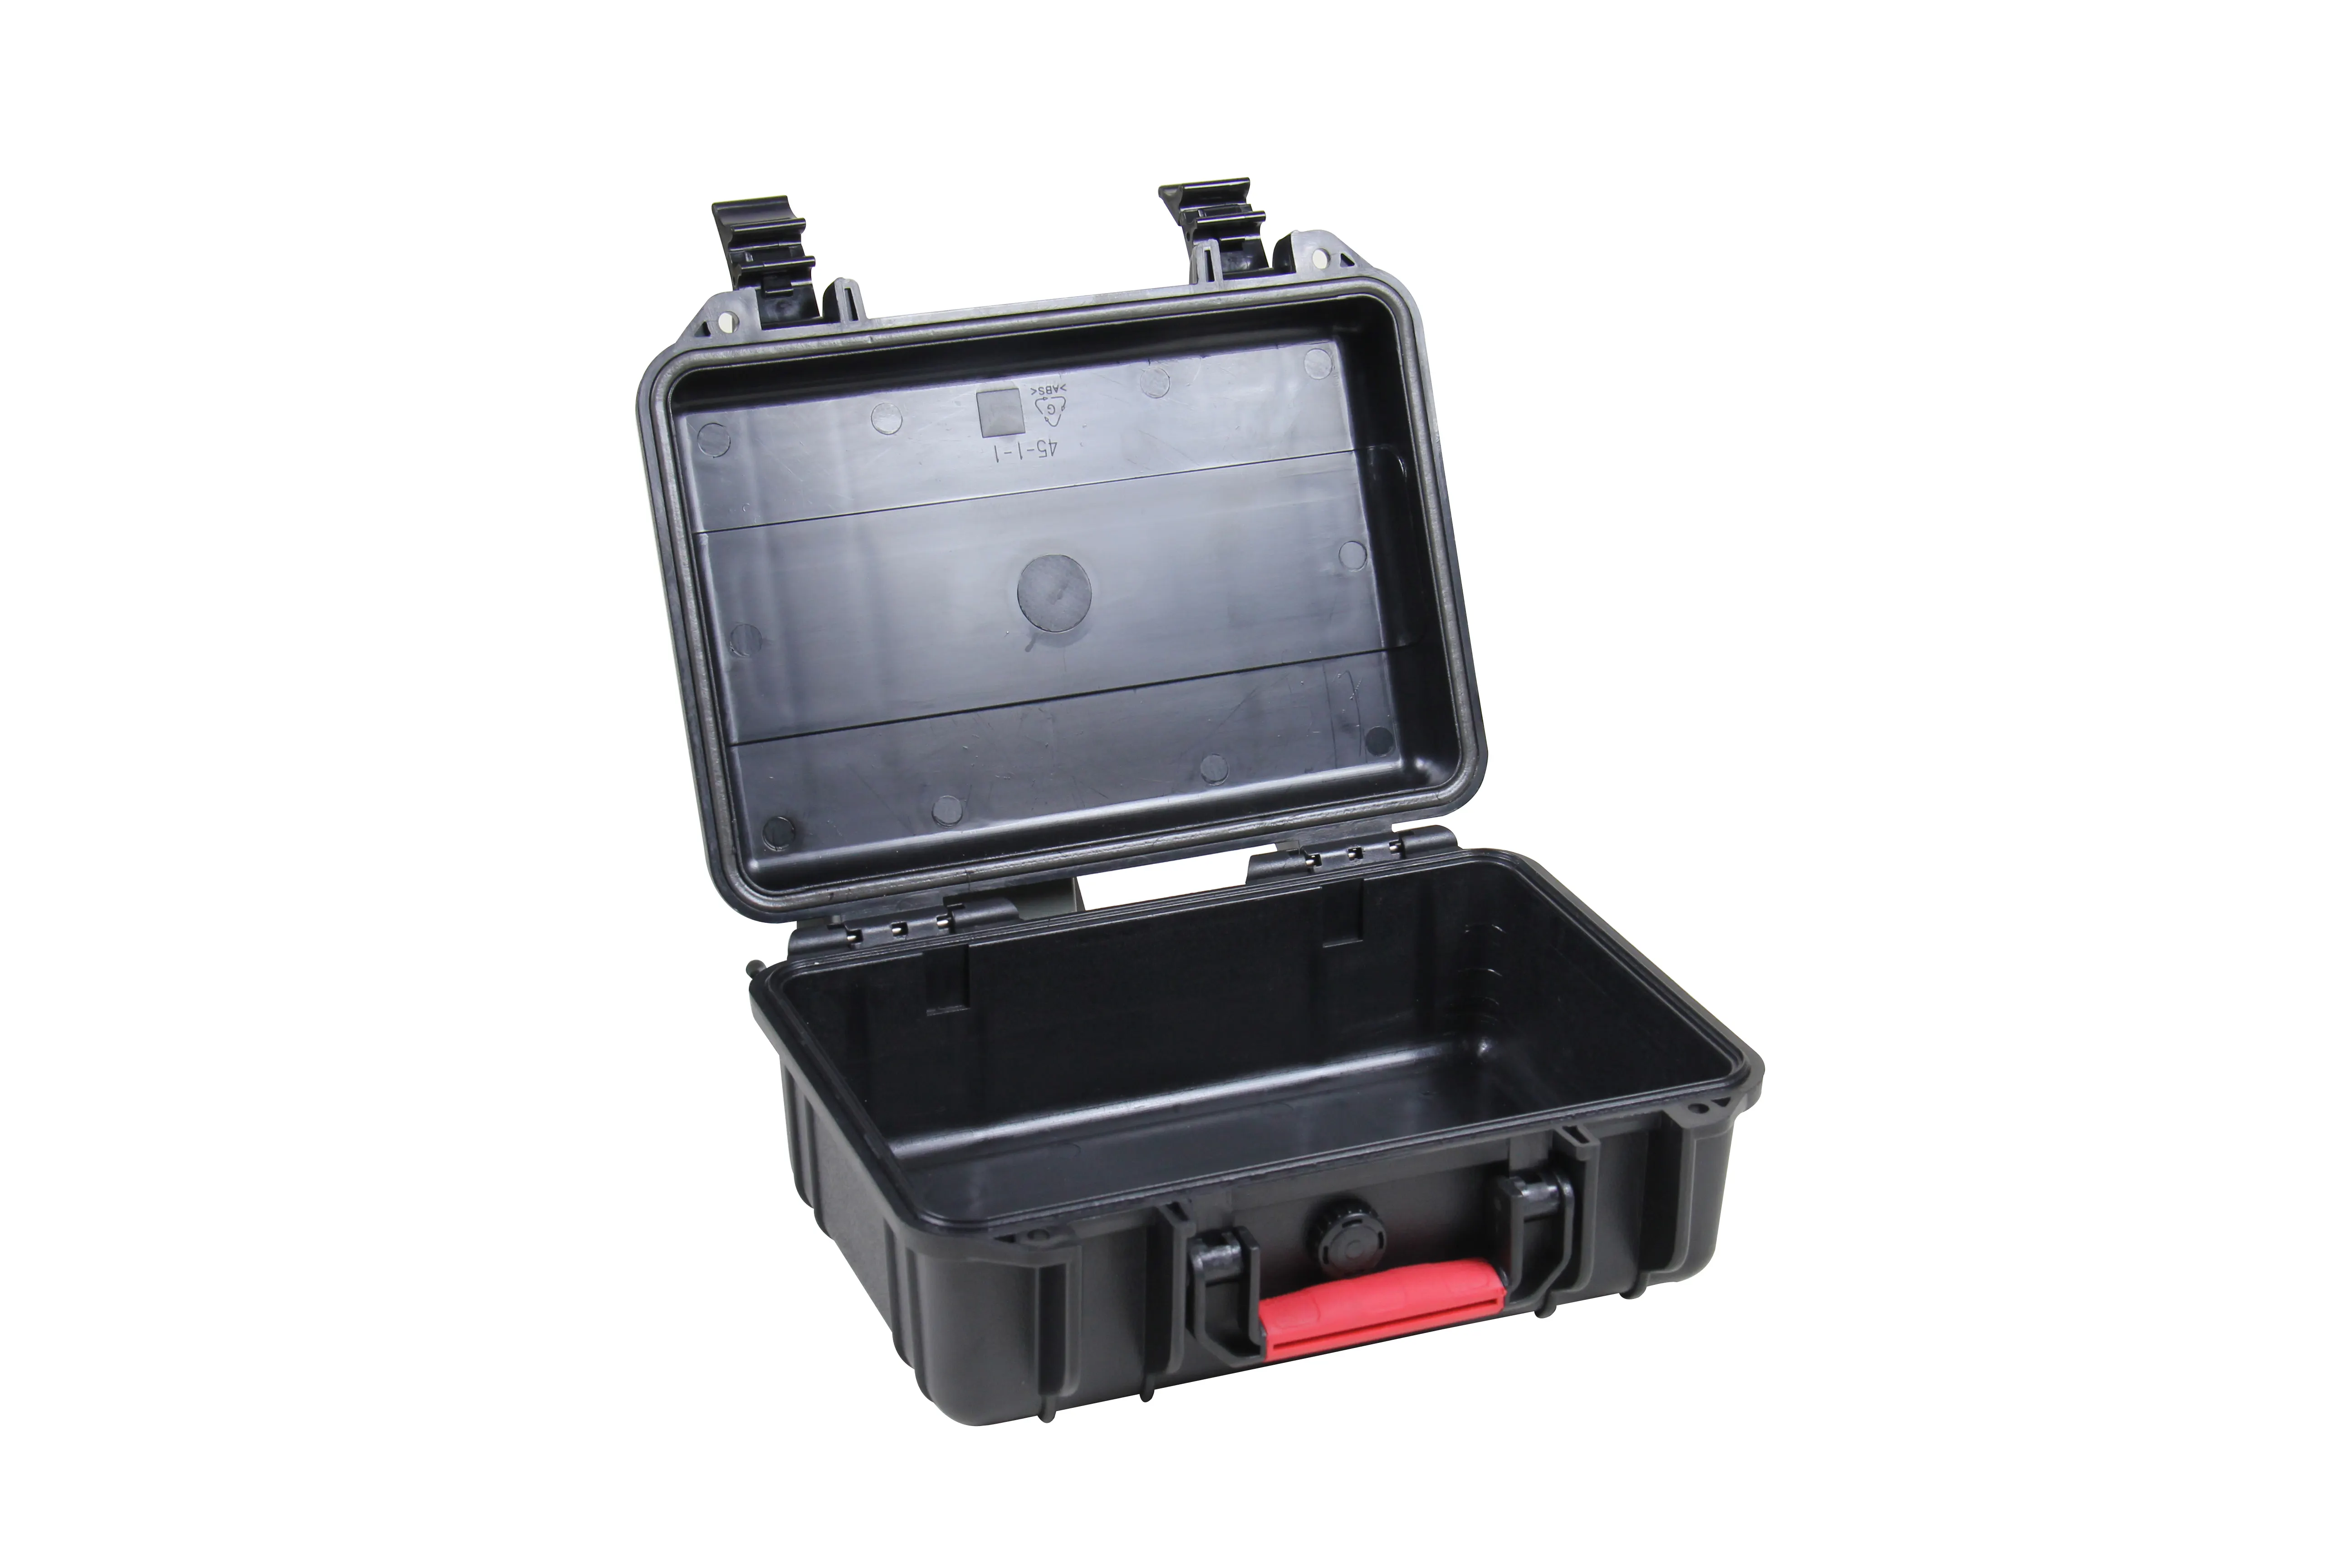 Solid Hardware Storage ABS Plastic Carrying Case with Compartments Shockproof and Dustproof Tool Boxes Instrument Case